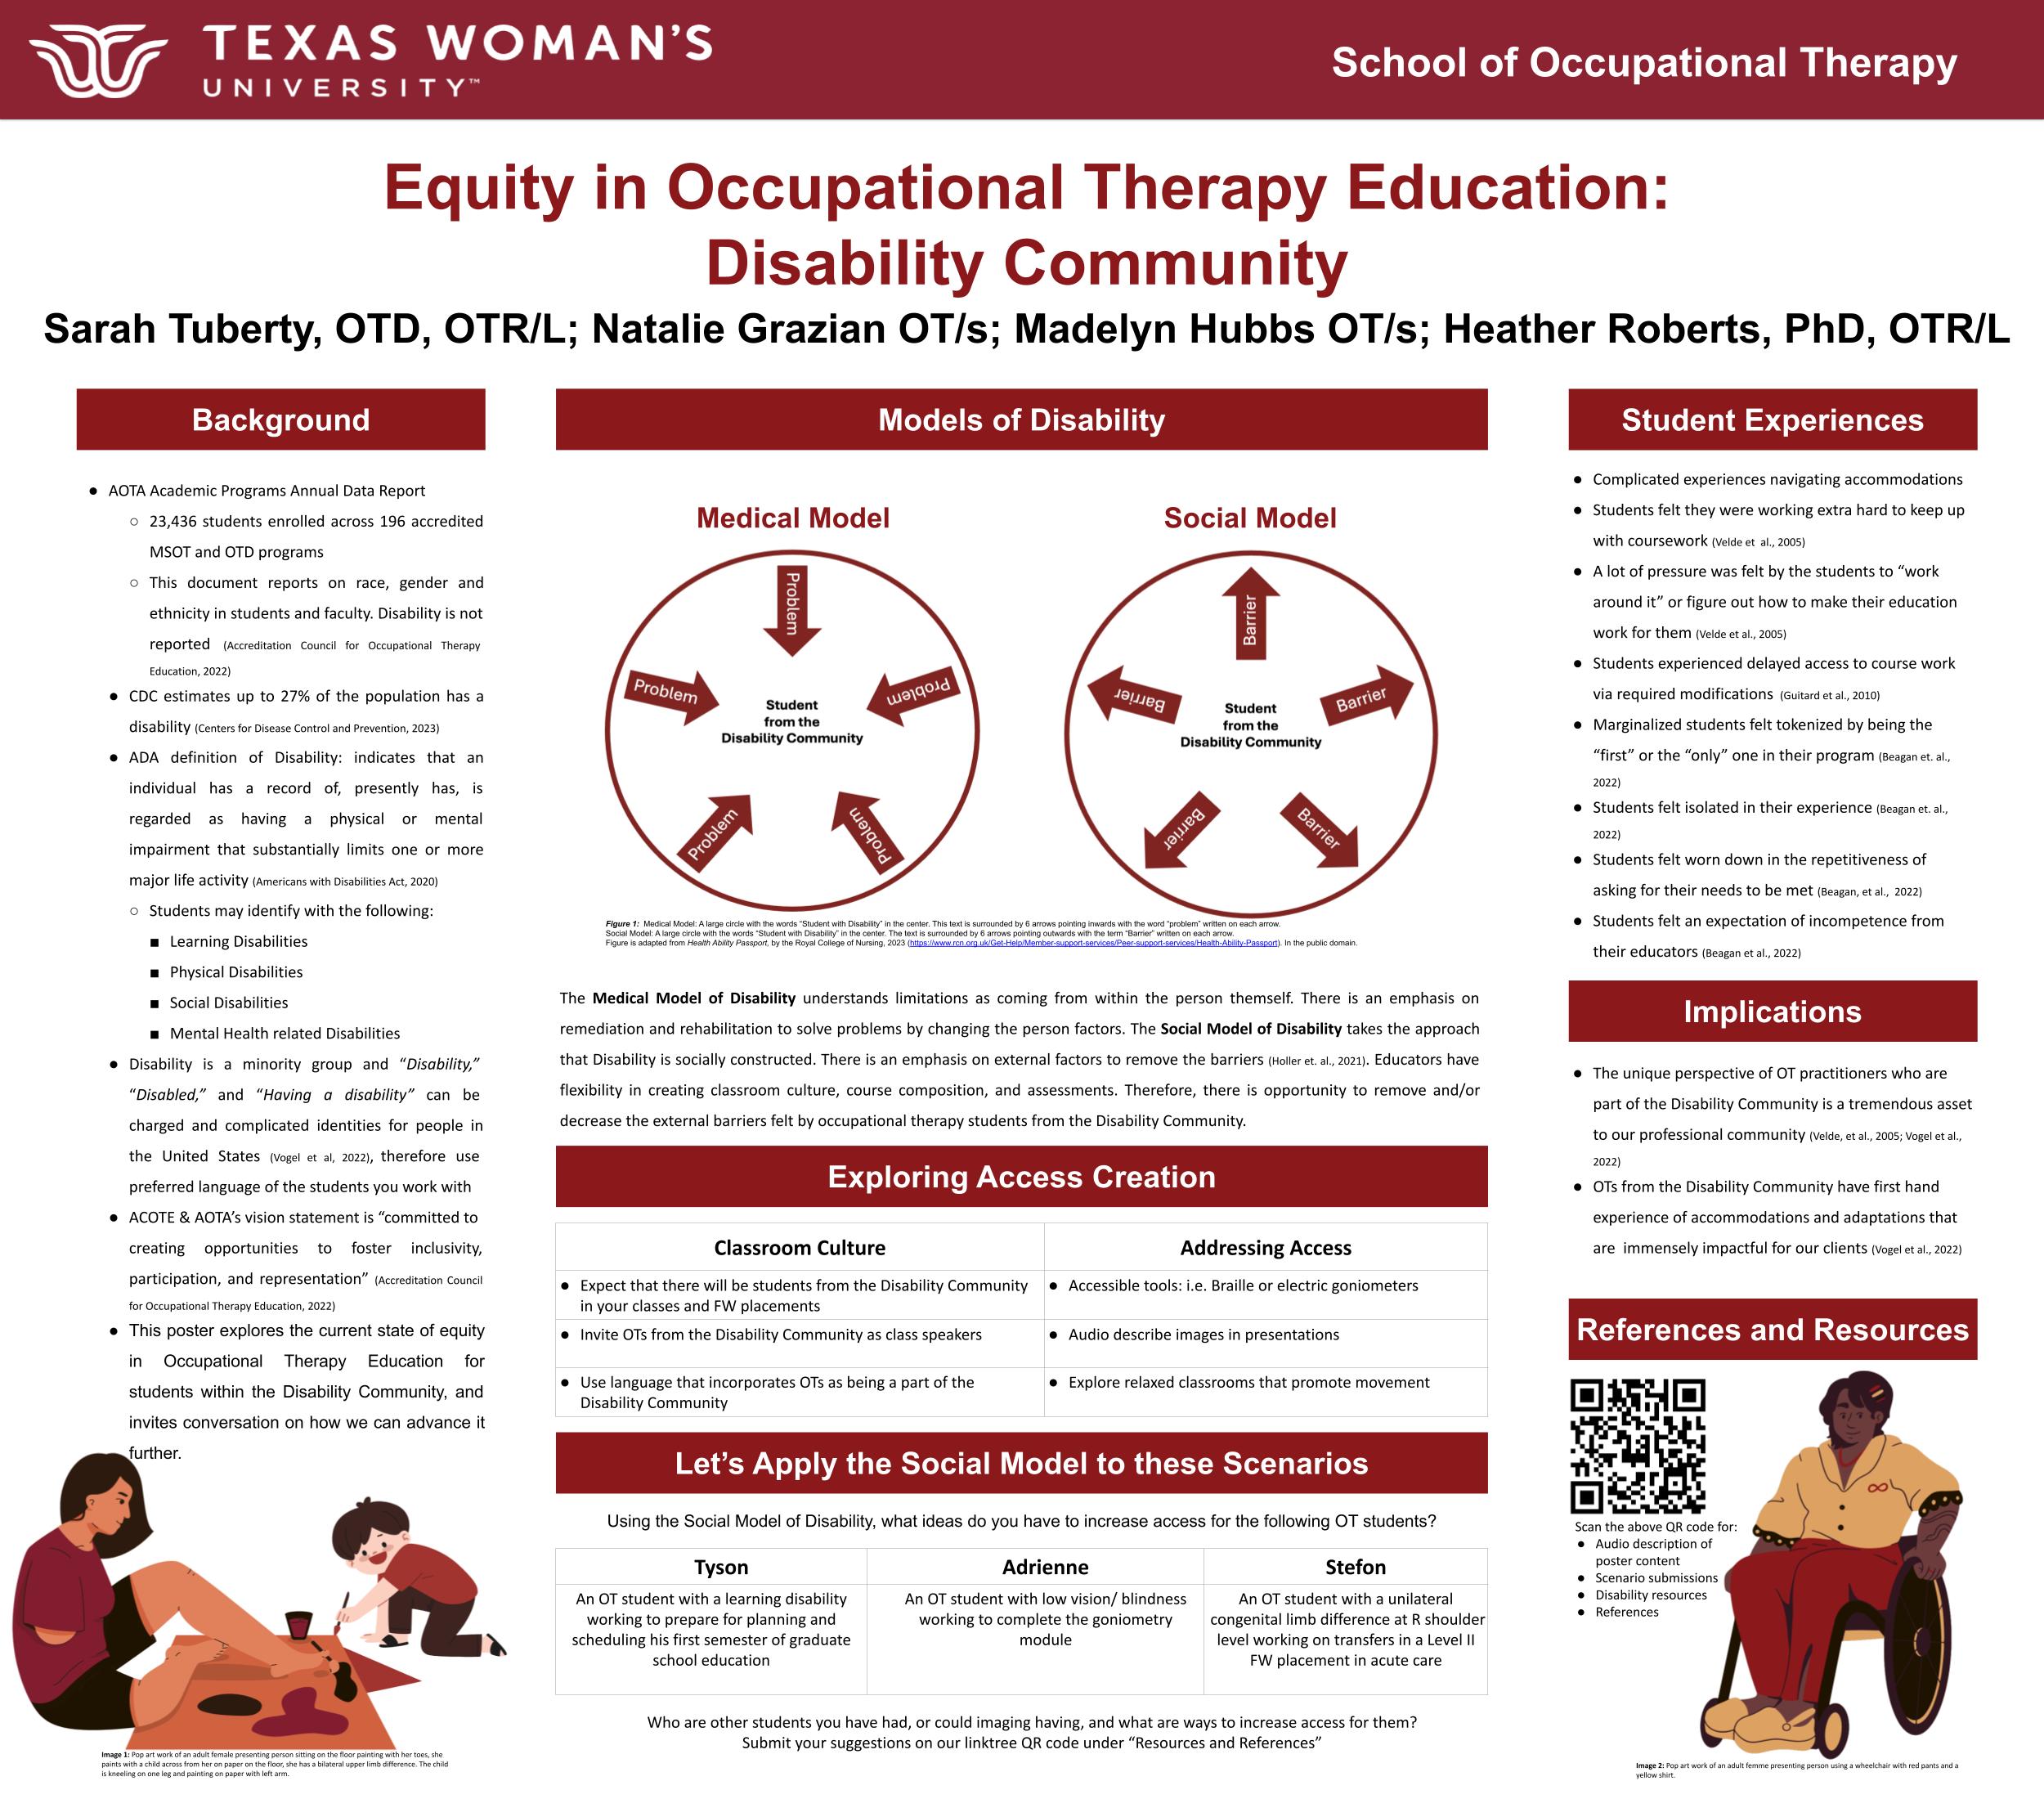 Image of the Equity in Occupational Therapy Education - Disability Community Poster